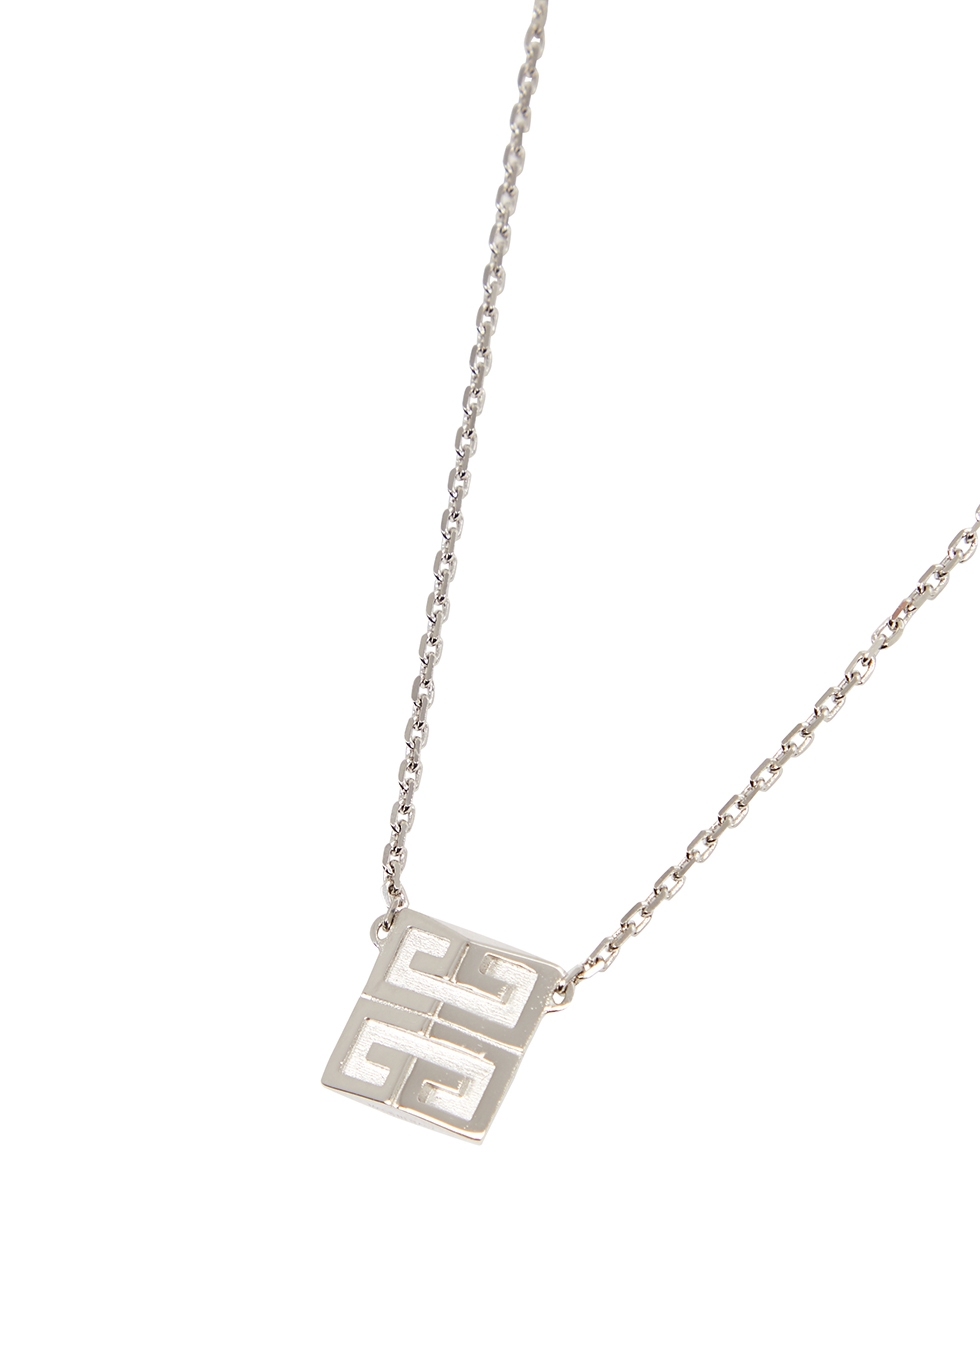 Givenchy G Square silver-tone necklace - Harvey Nichols